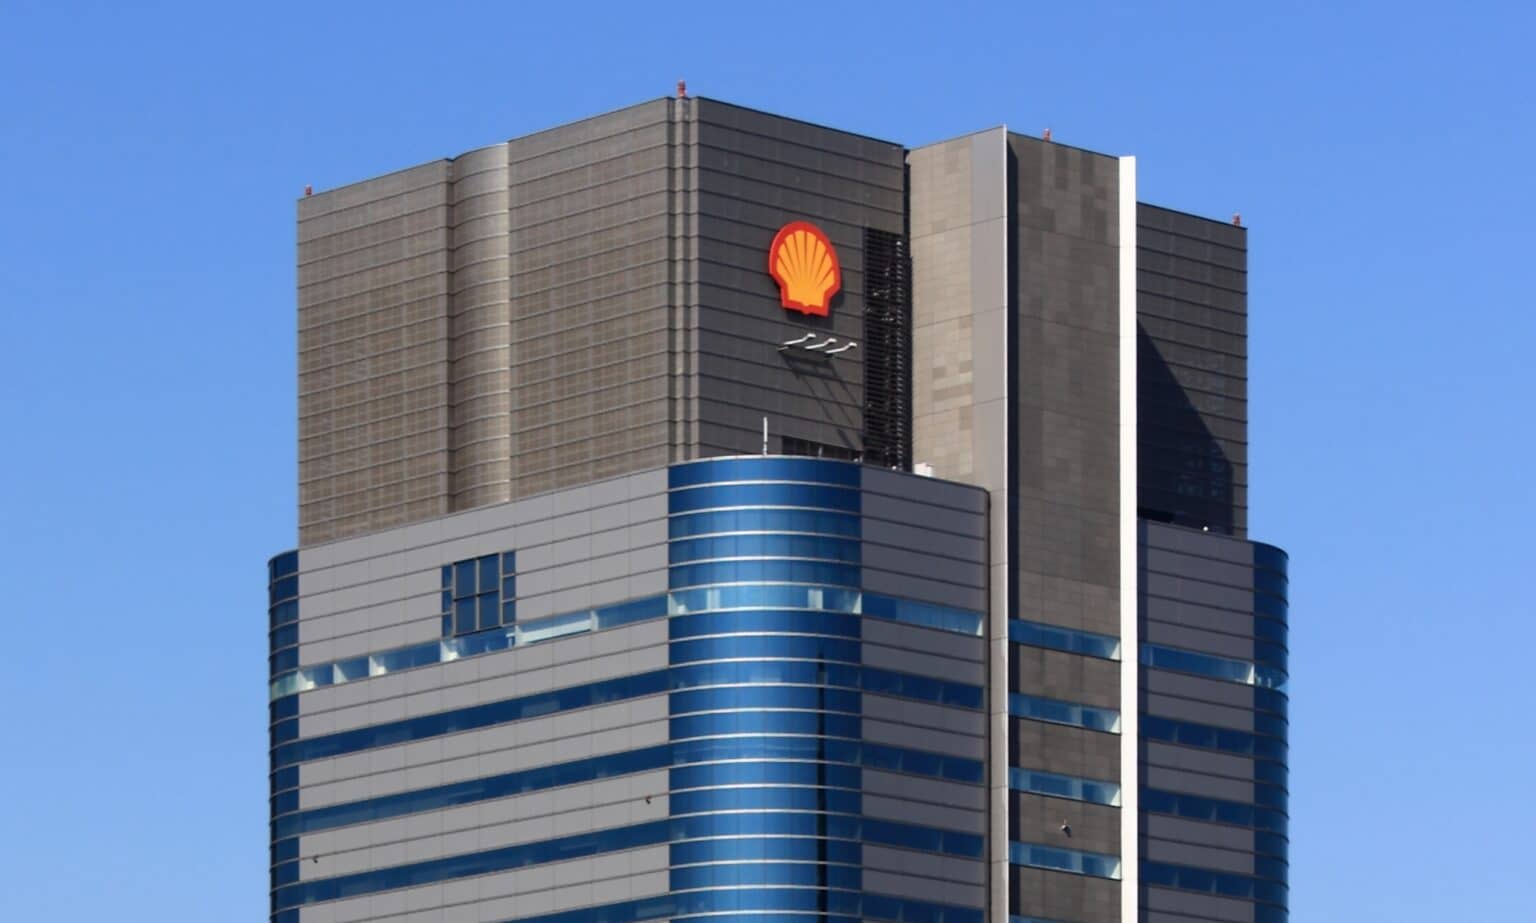 Top of a gray and blue skyscraper with yellow and red shell-shaped Shell oil logo